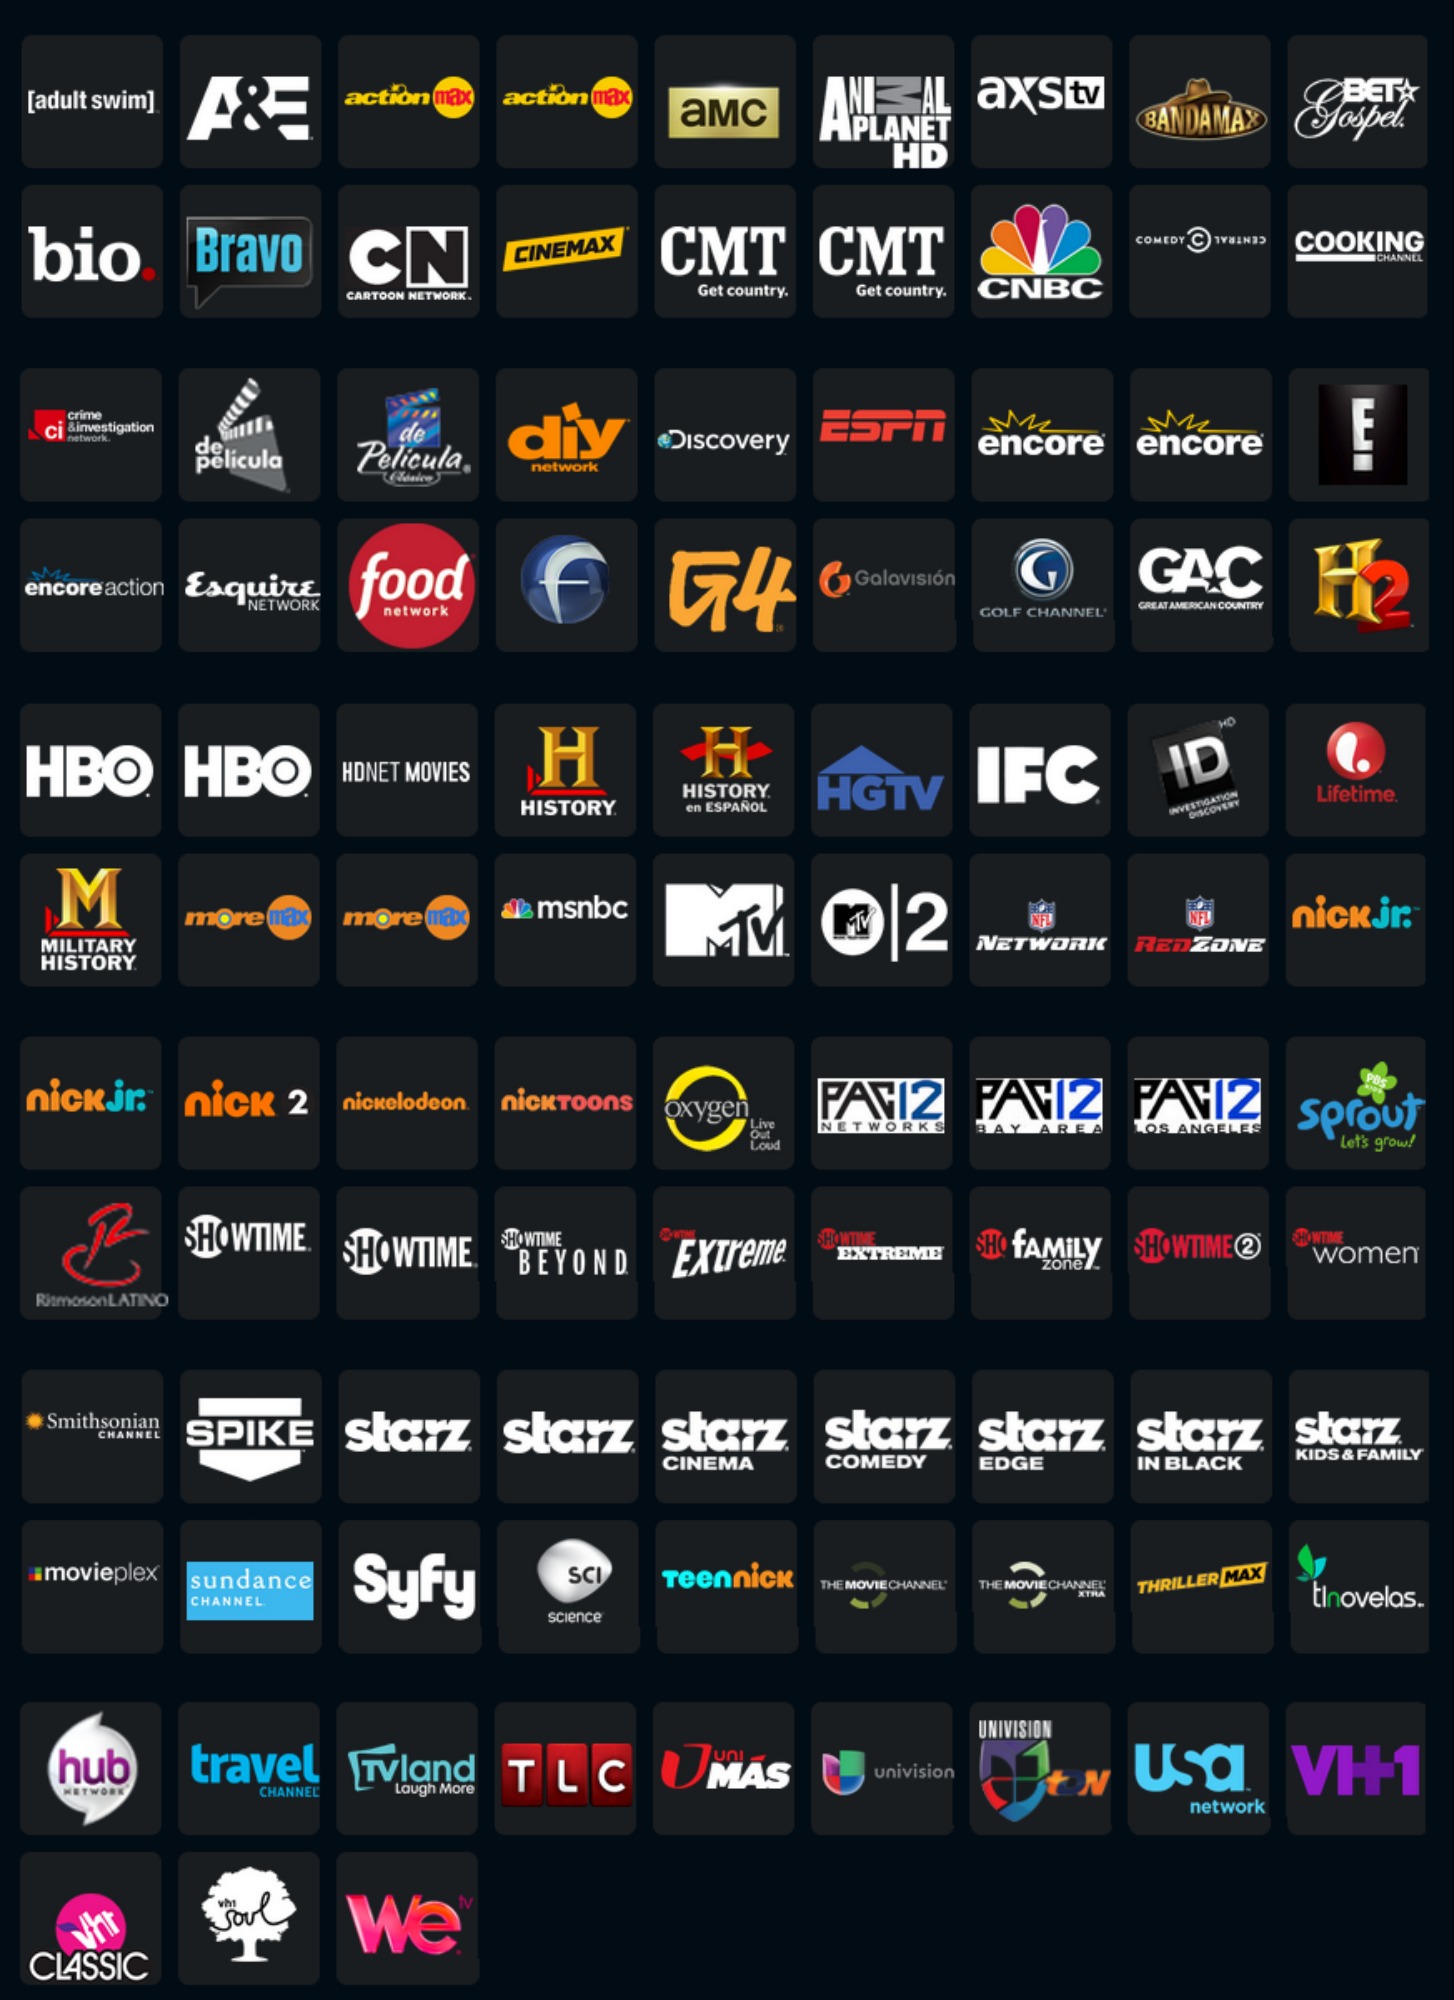 list streaming tv channel comparison